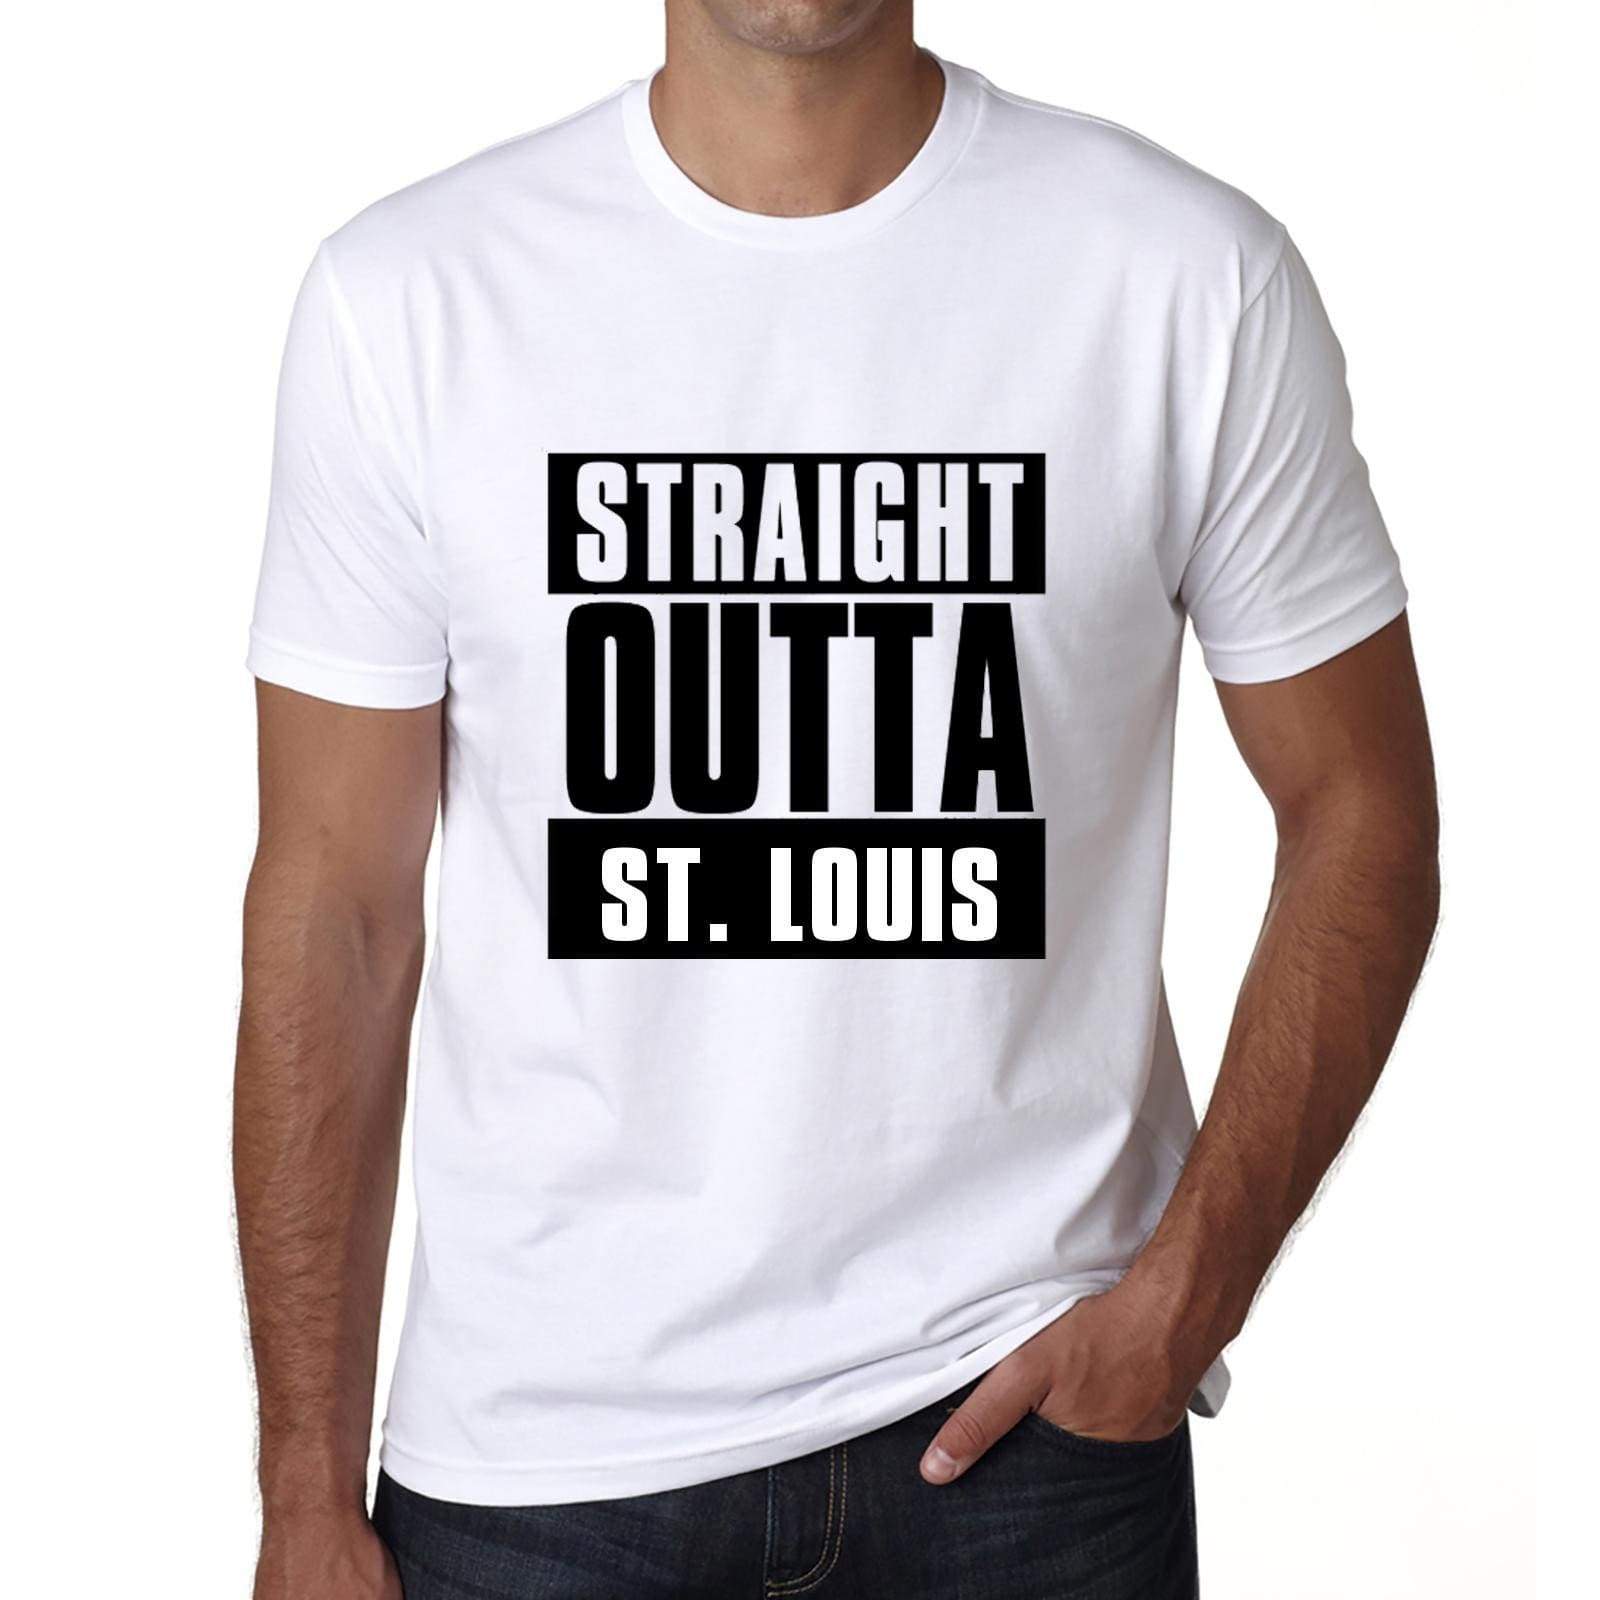 Straight Outta St. Louis Mens Short Sleeve Round Neck T-Shirt 00027 - White / S - Casual